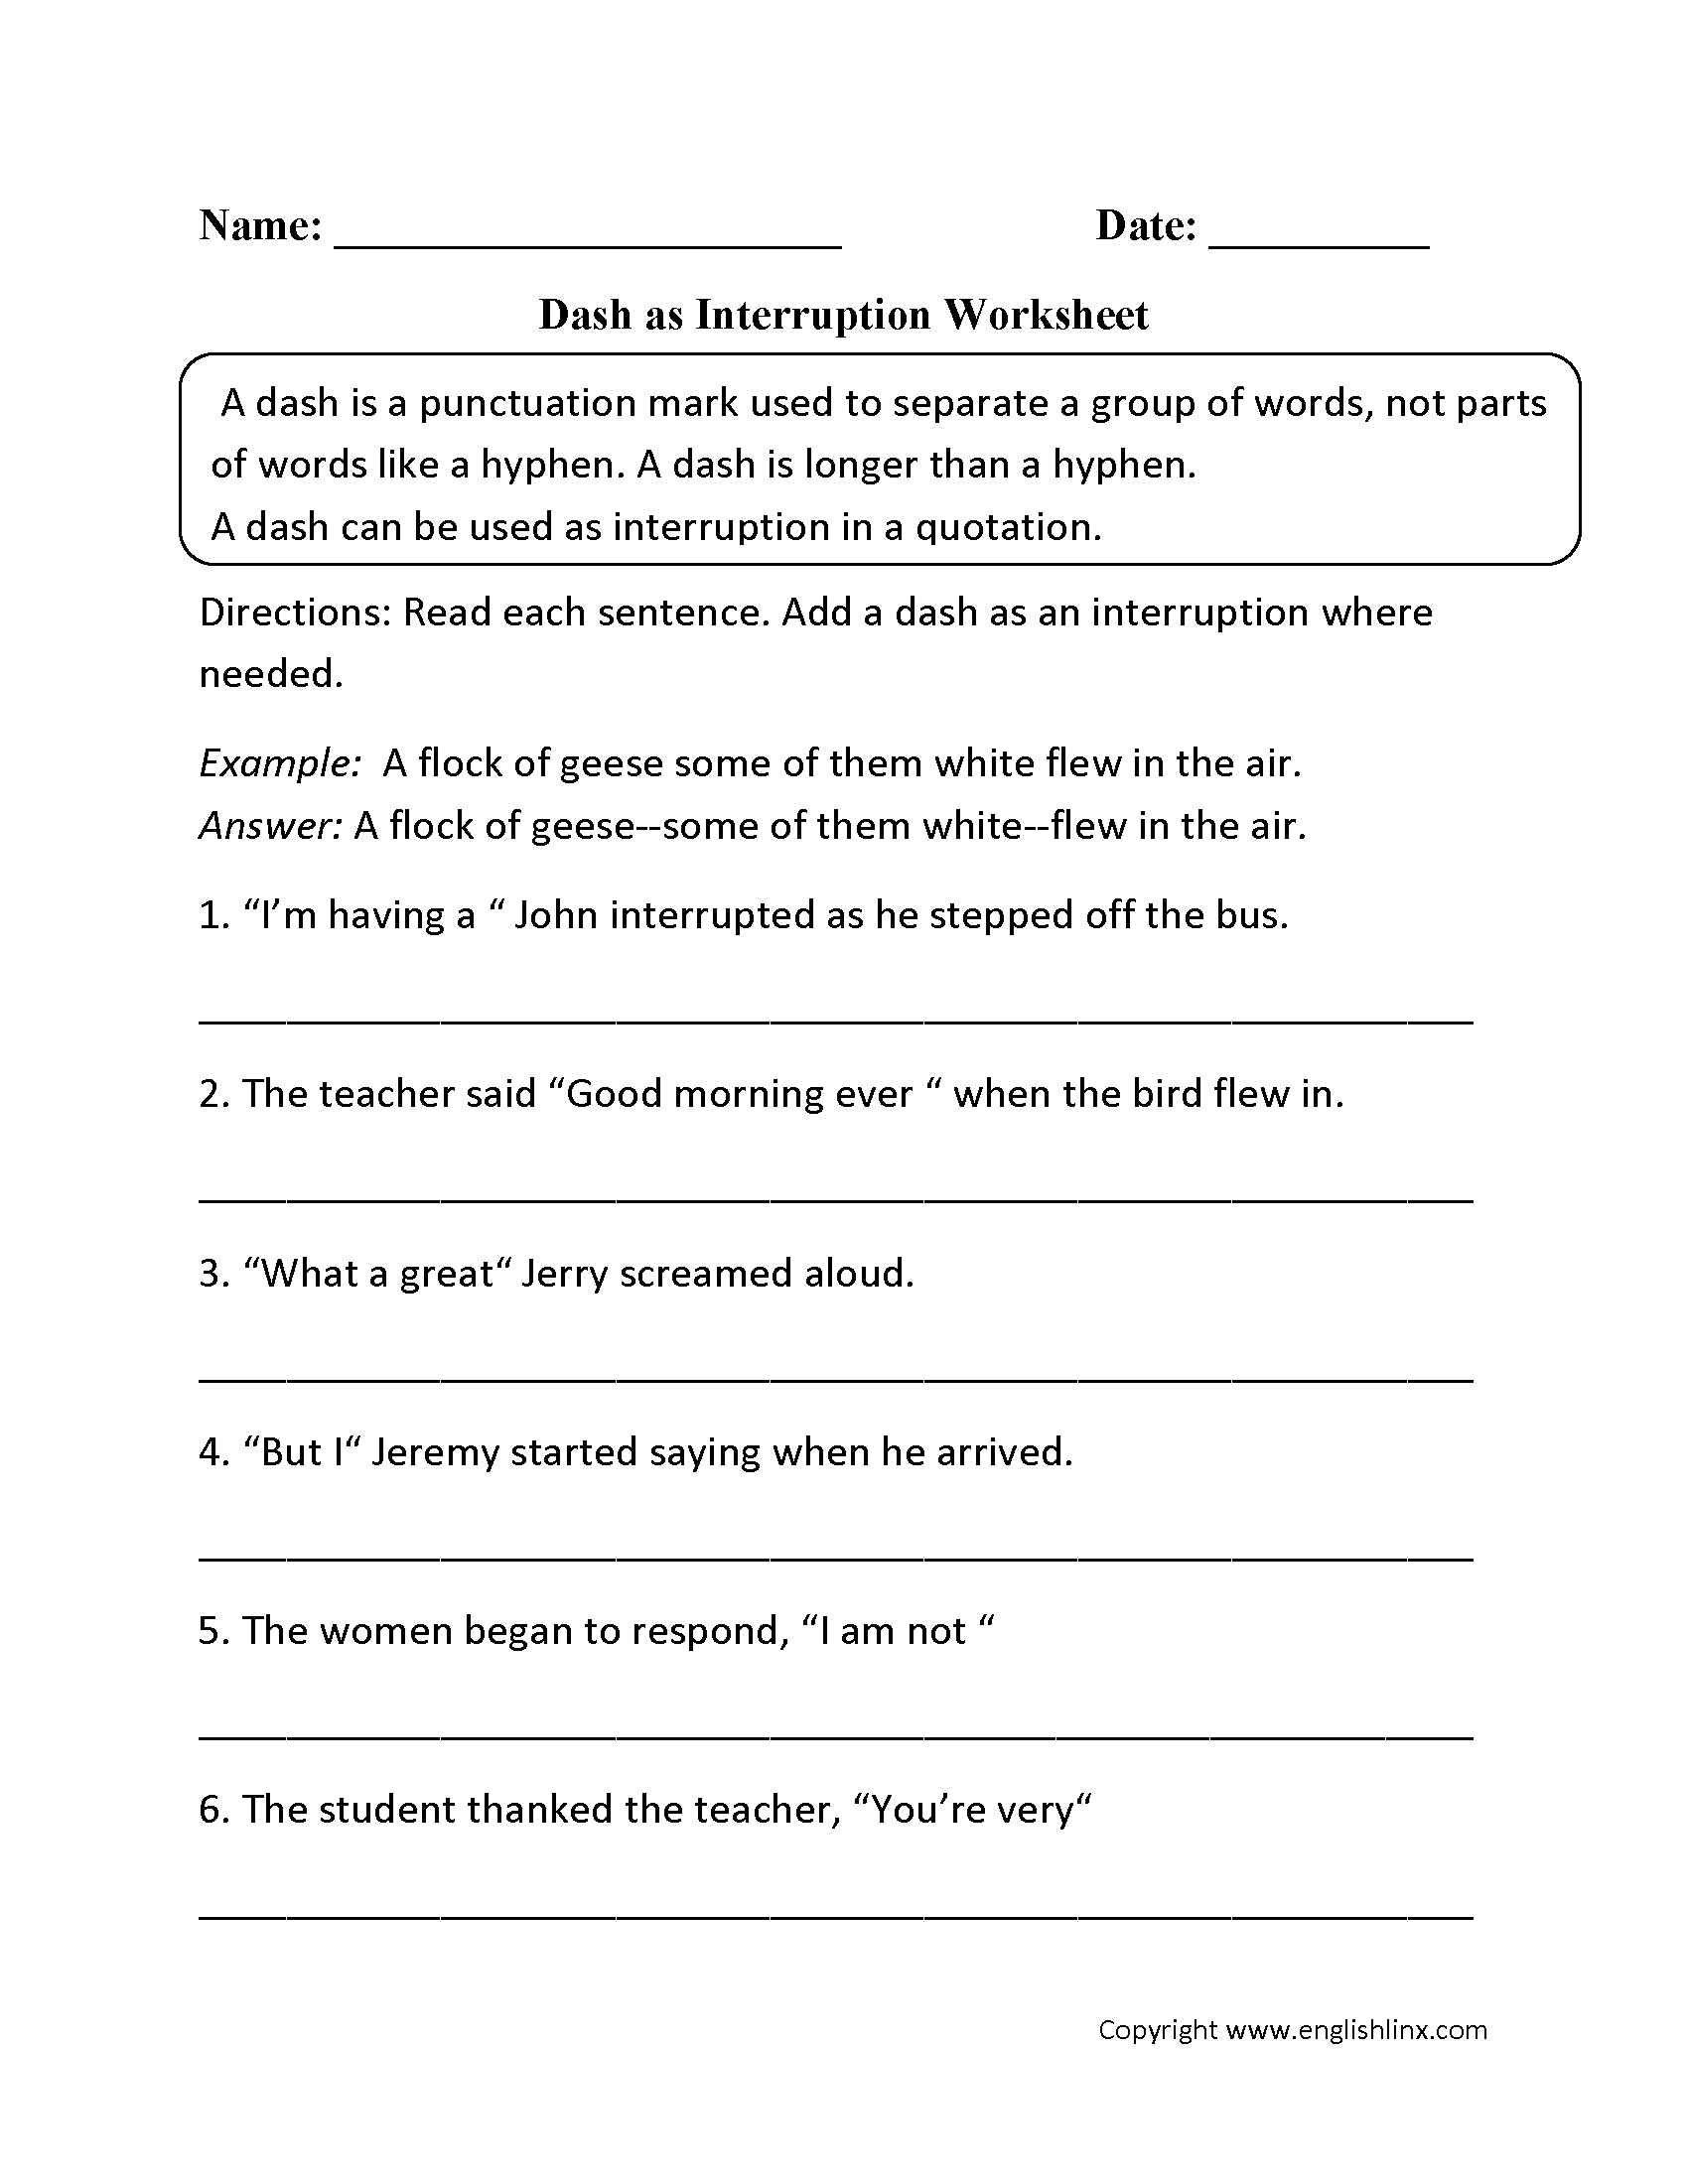 hyphens-and-dashes-worksheet-answers-db-excel